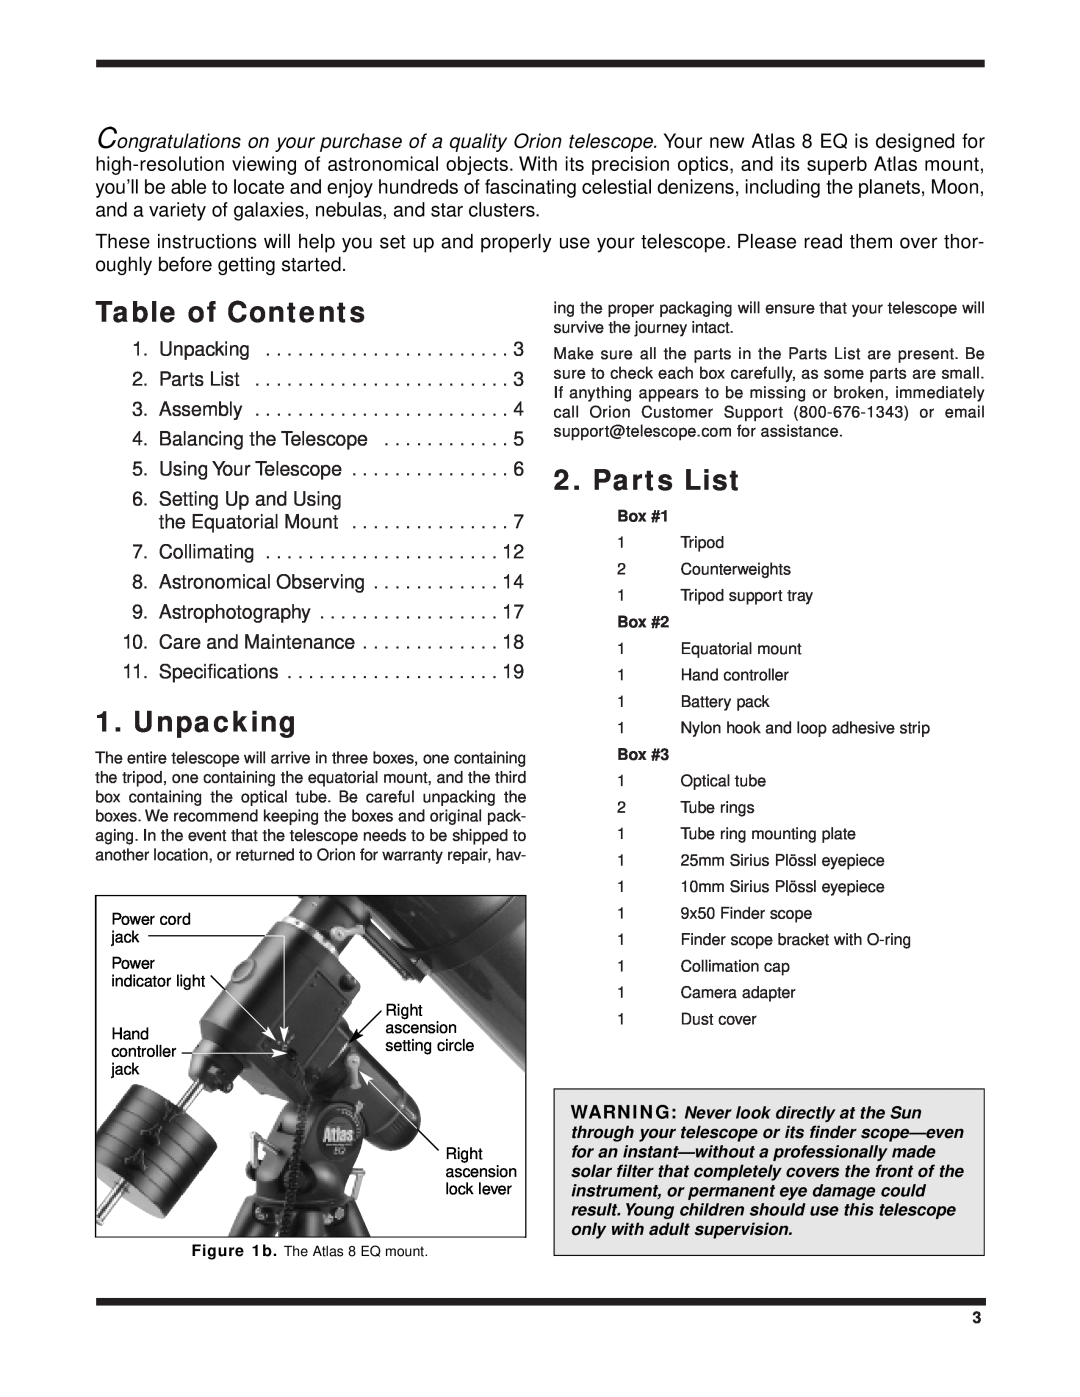 Orion 8 EQ instruction manual Table of Contents, Unpacking, Parts List 